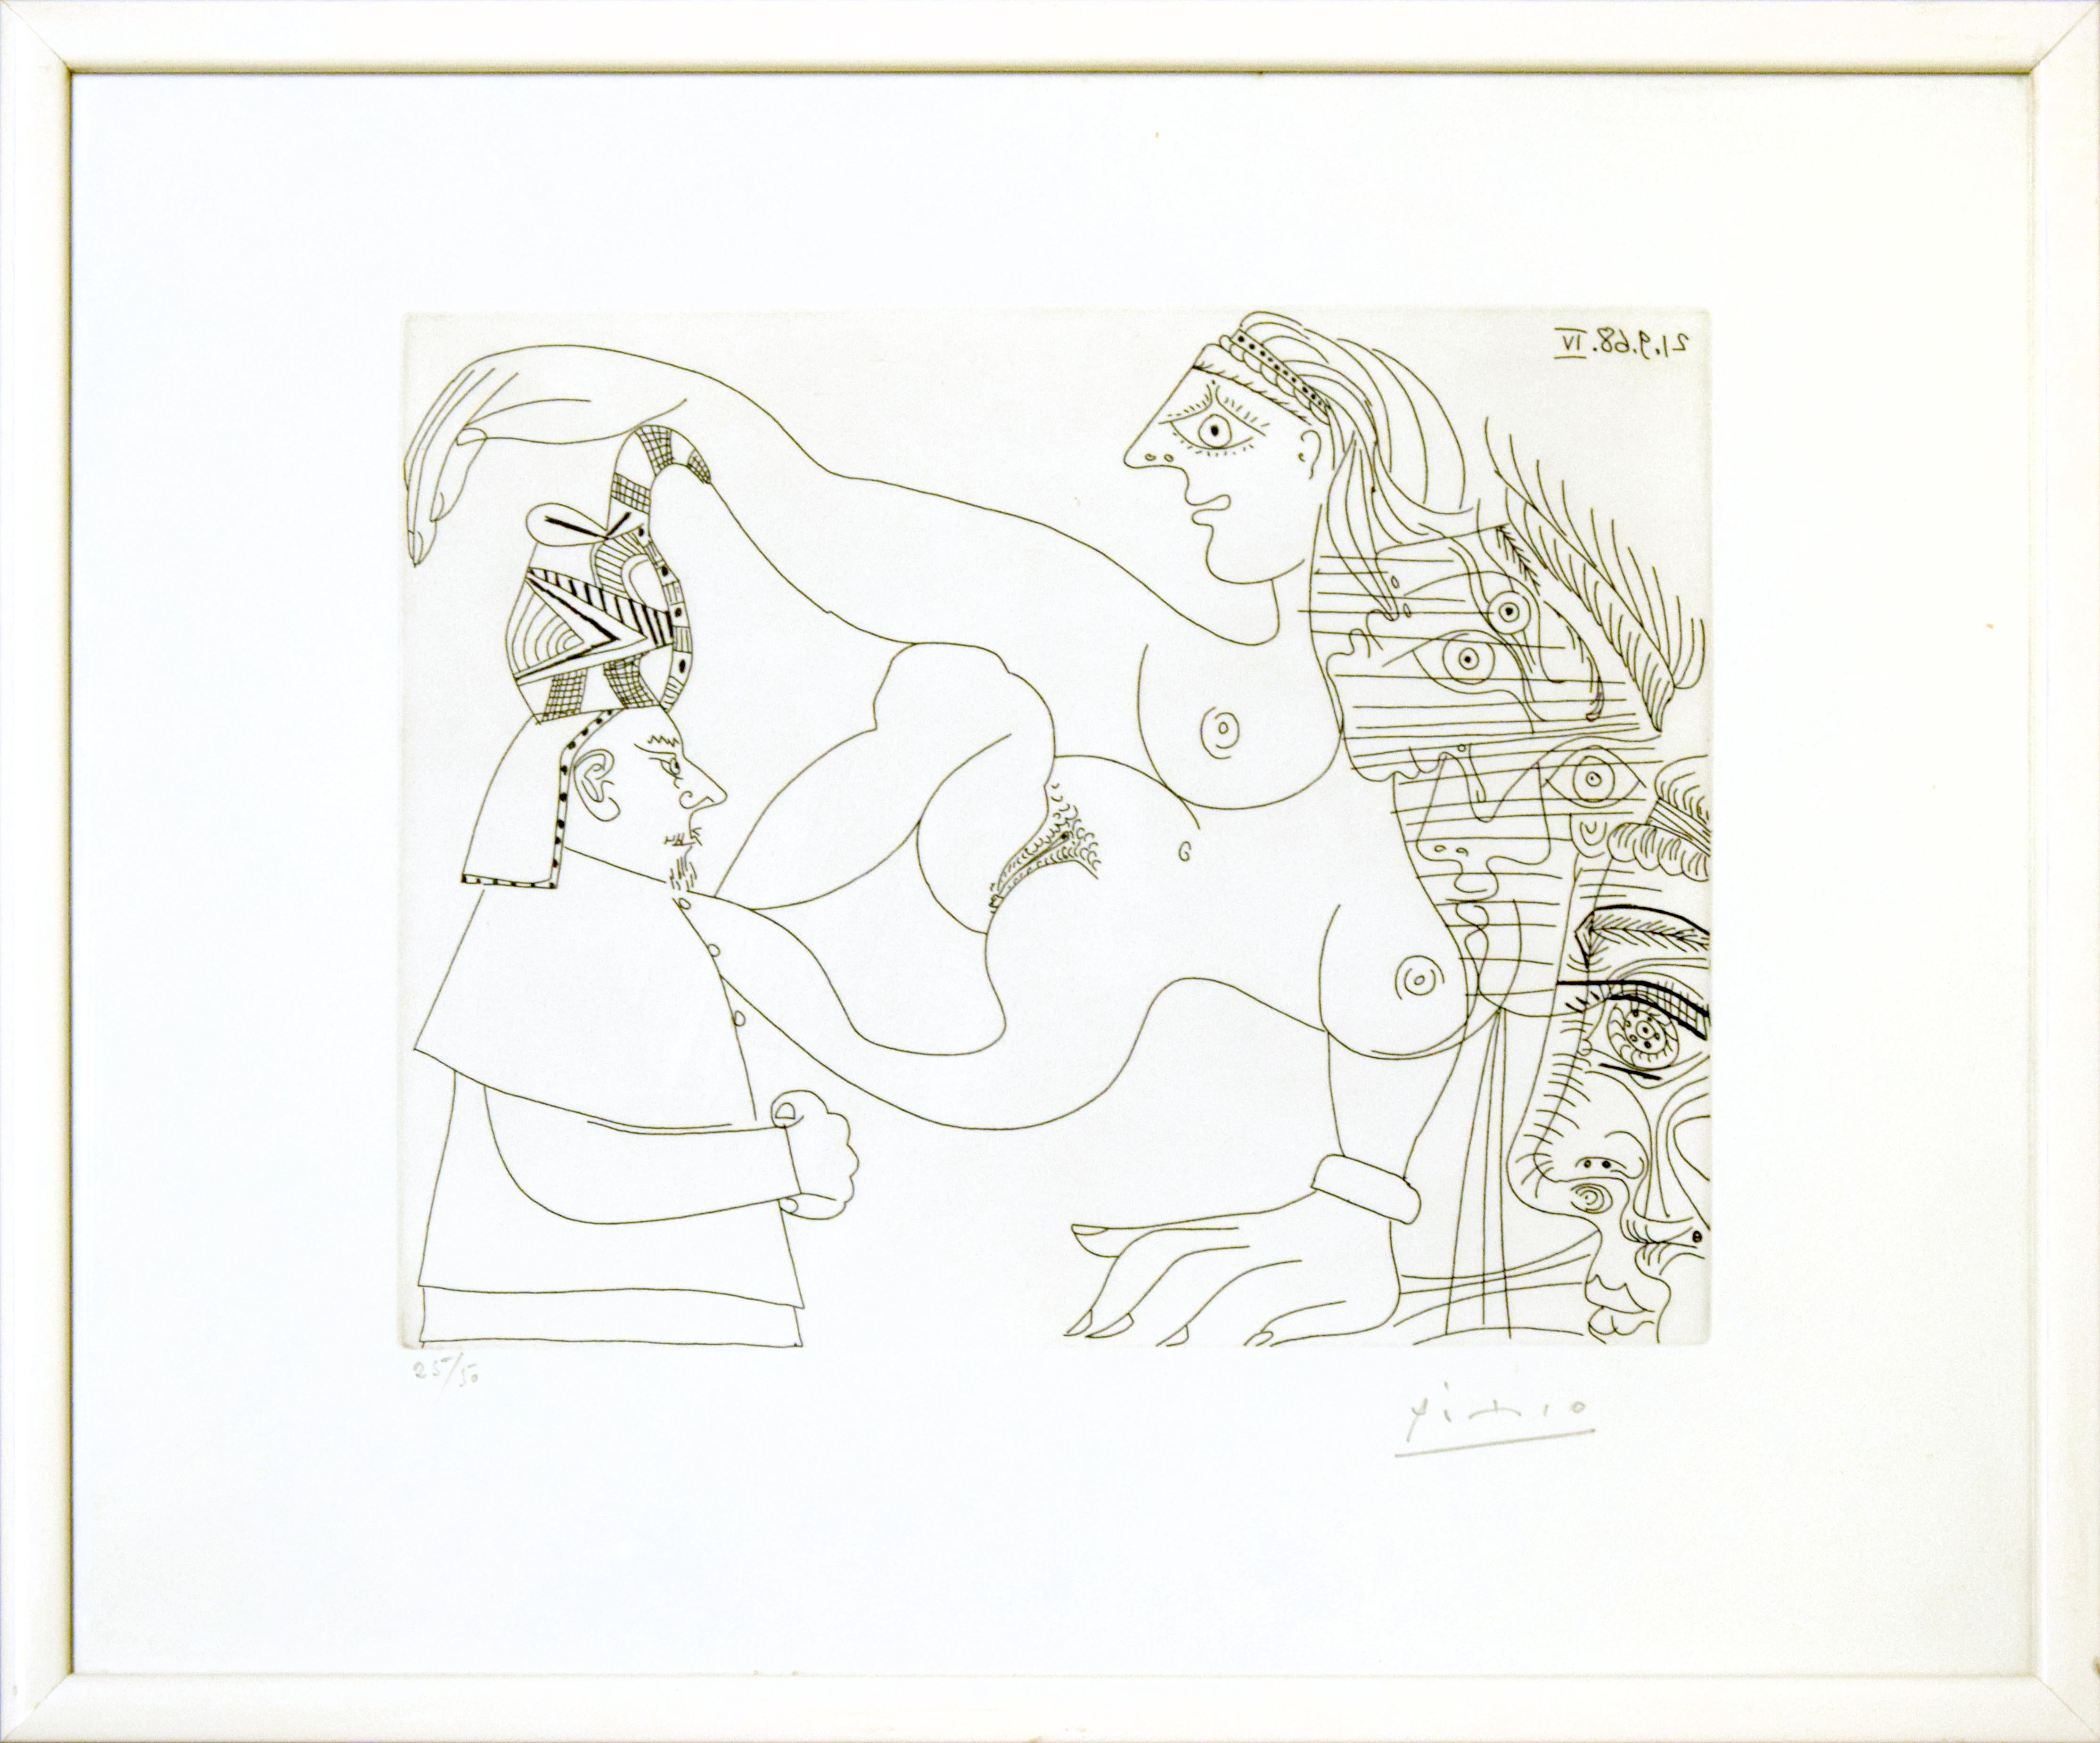 Untitled, 21.9.68.IV. - Original b/w Etching by Pablo Picasso - 1968 1